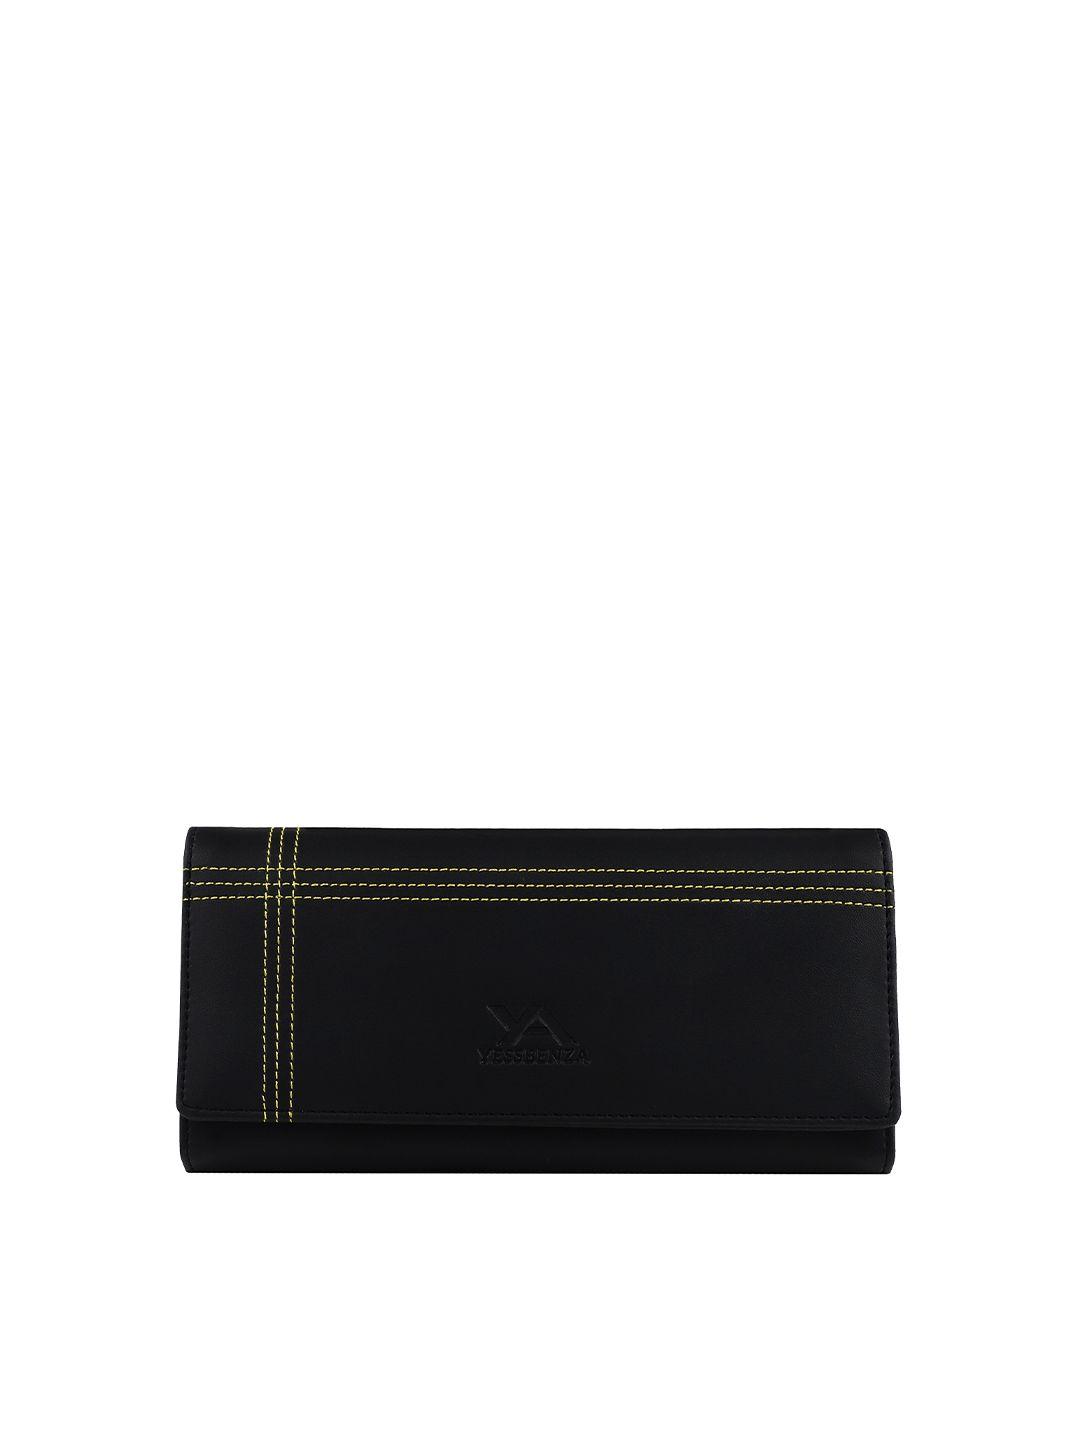 yessbenza women black & yellow textured two fold wallet